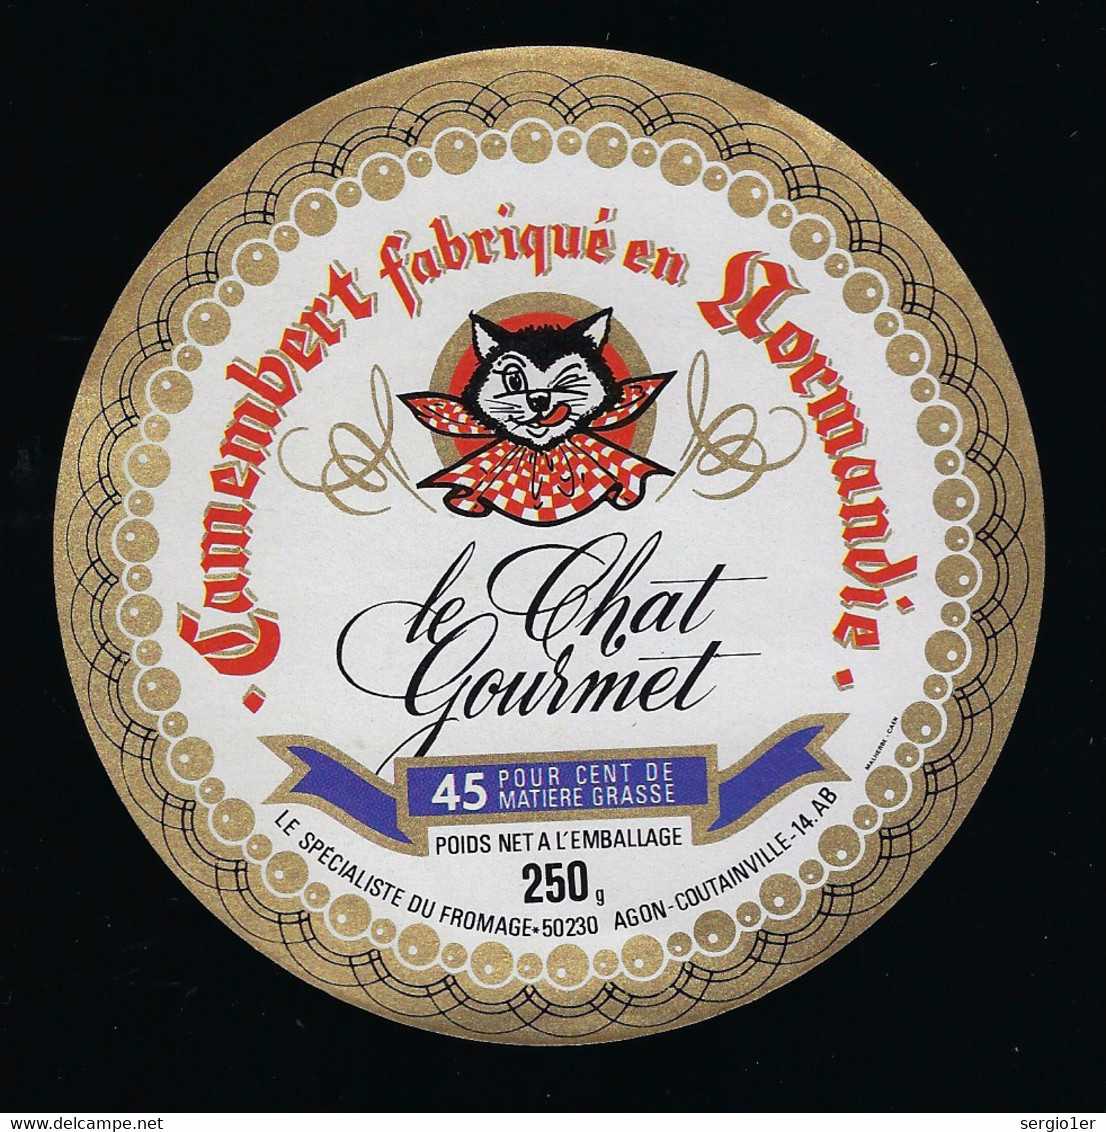 J1080 FROMAGE CAMEMBERT CHAT CLECY CALVADOS AGON-COUTAINVILLE MANCHE 